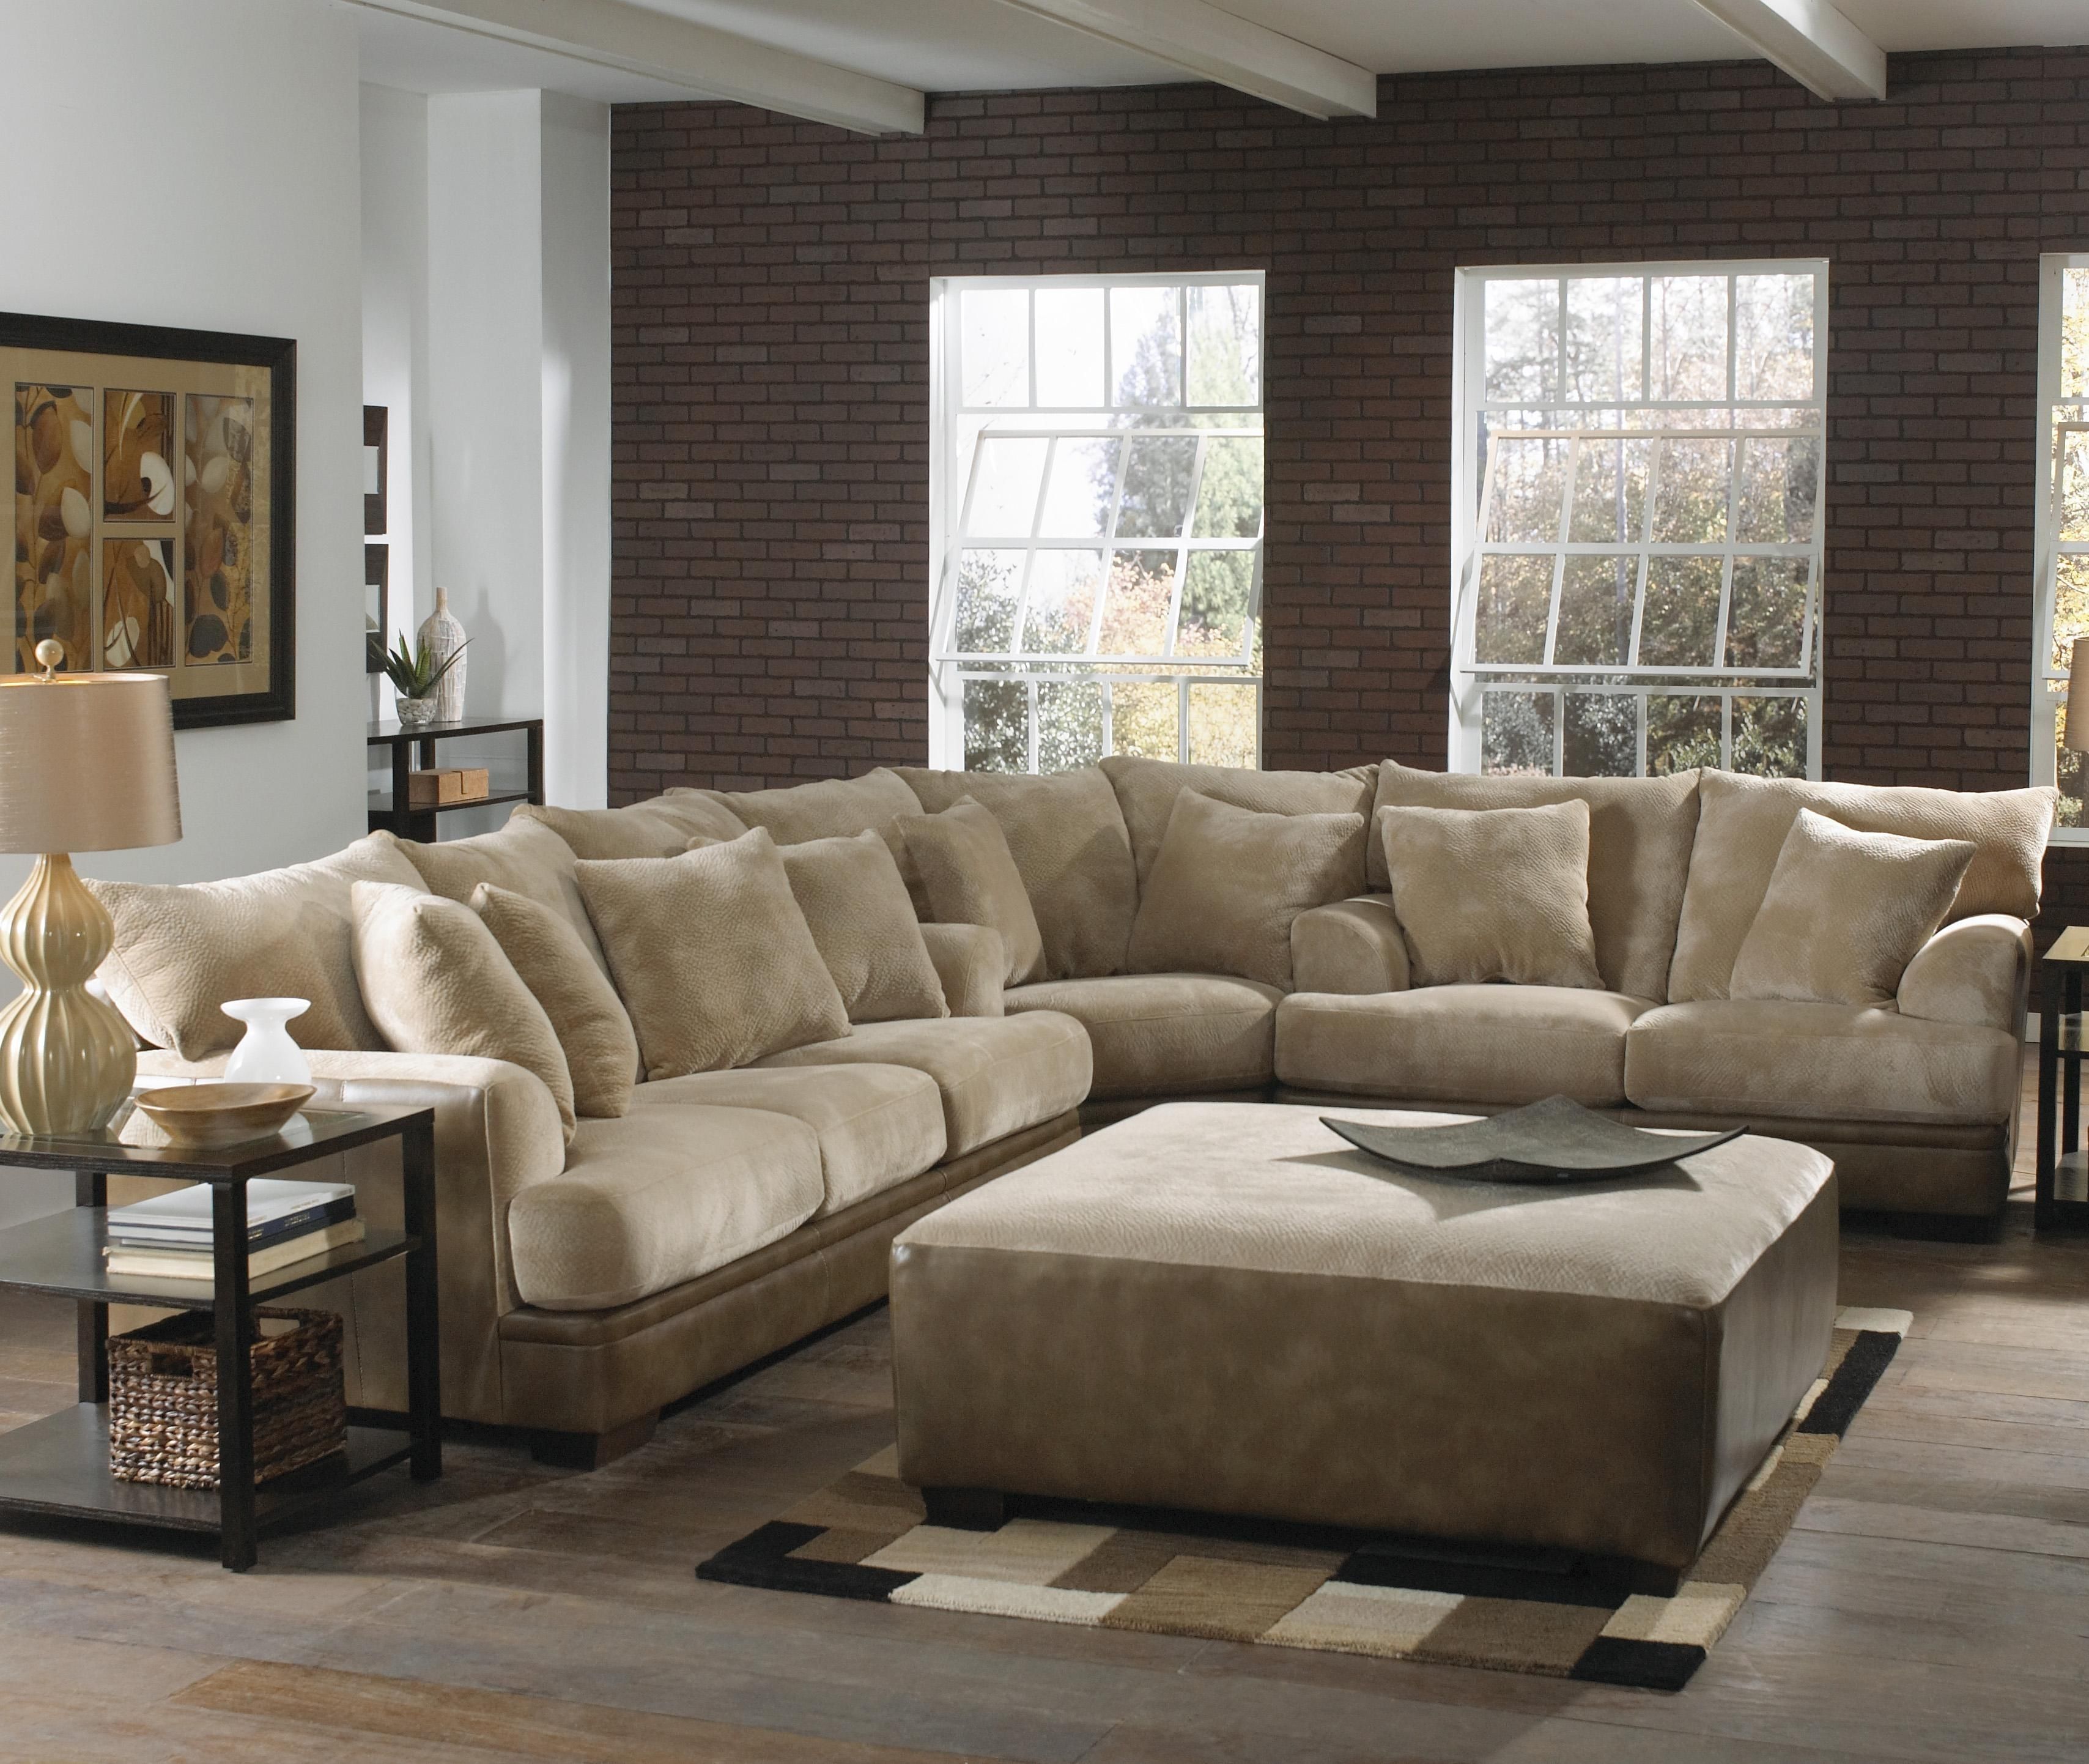 Barkley Large L Shaped Sectional Sofa With Right Side Loveseat Throughout East Bay Sectional Sofas (View 2 of 10)